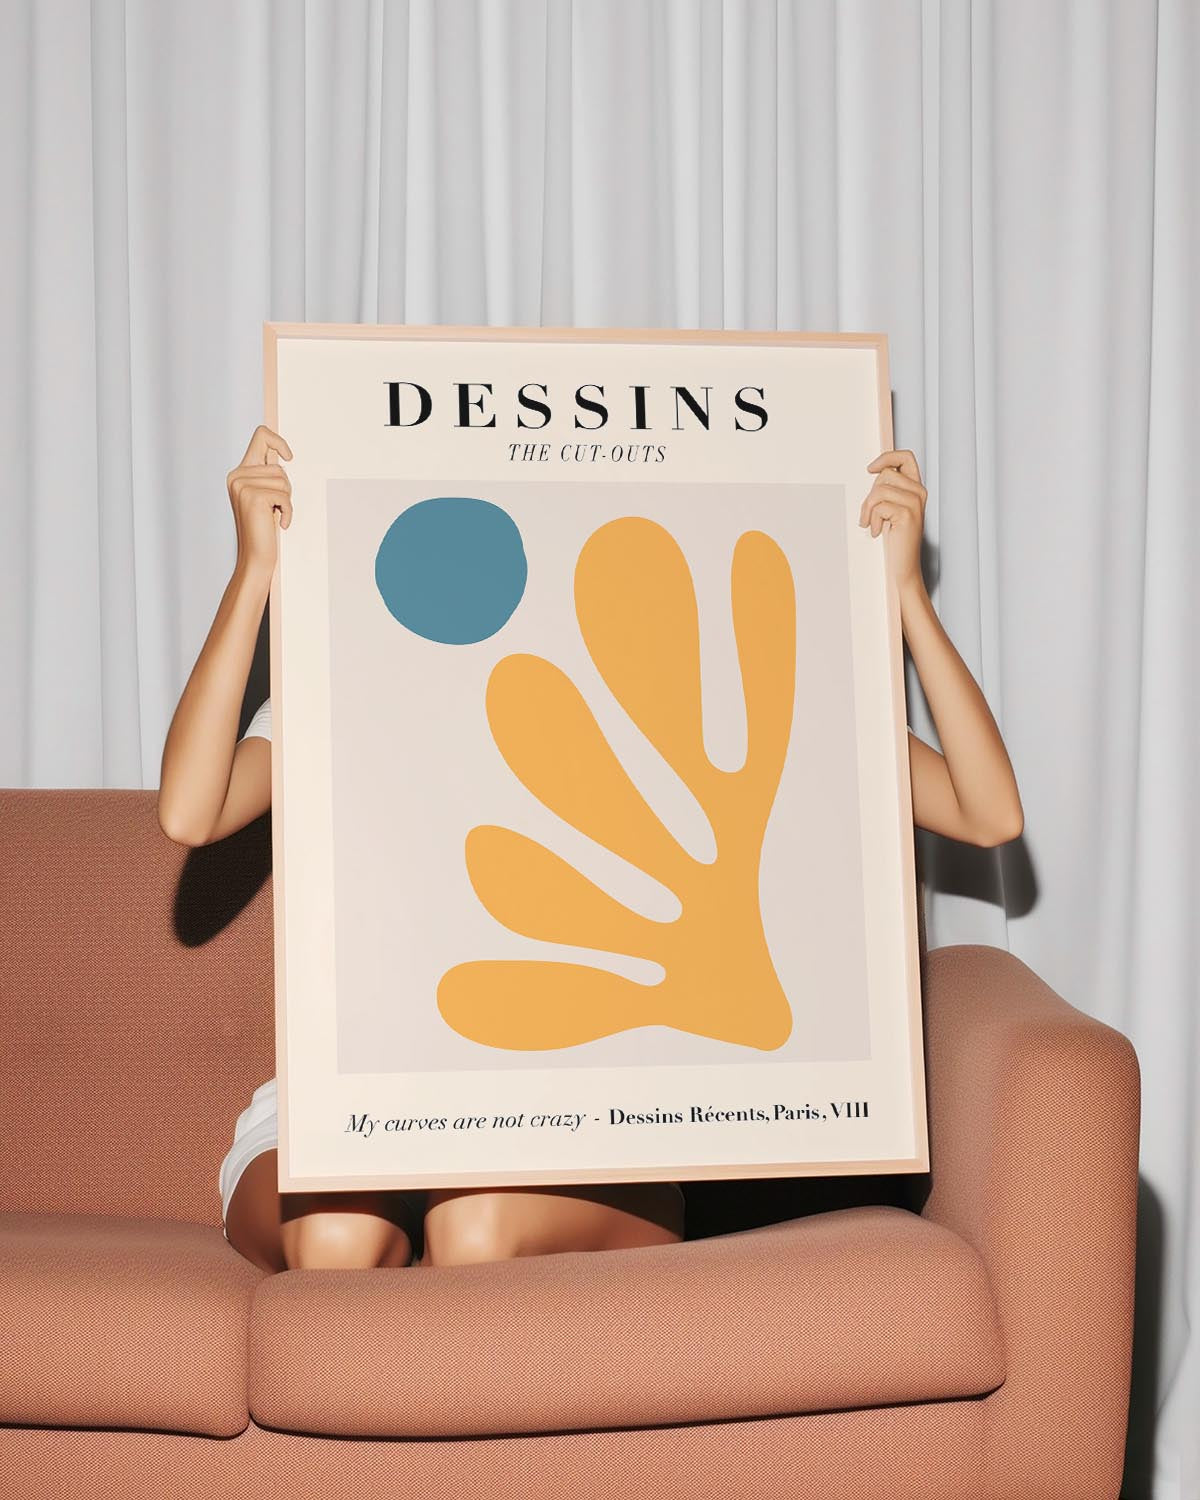 Modern Matisse-inspired poster titled 'Dessins - The Cut-Outs,' showcasing abstract orange shapes against a neutral background with the text 'My curves are not crazy - Dessins Récents, Paris, VIII' at the bottom.